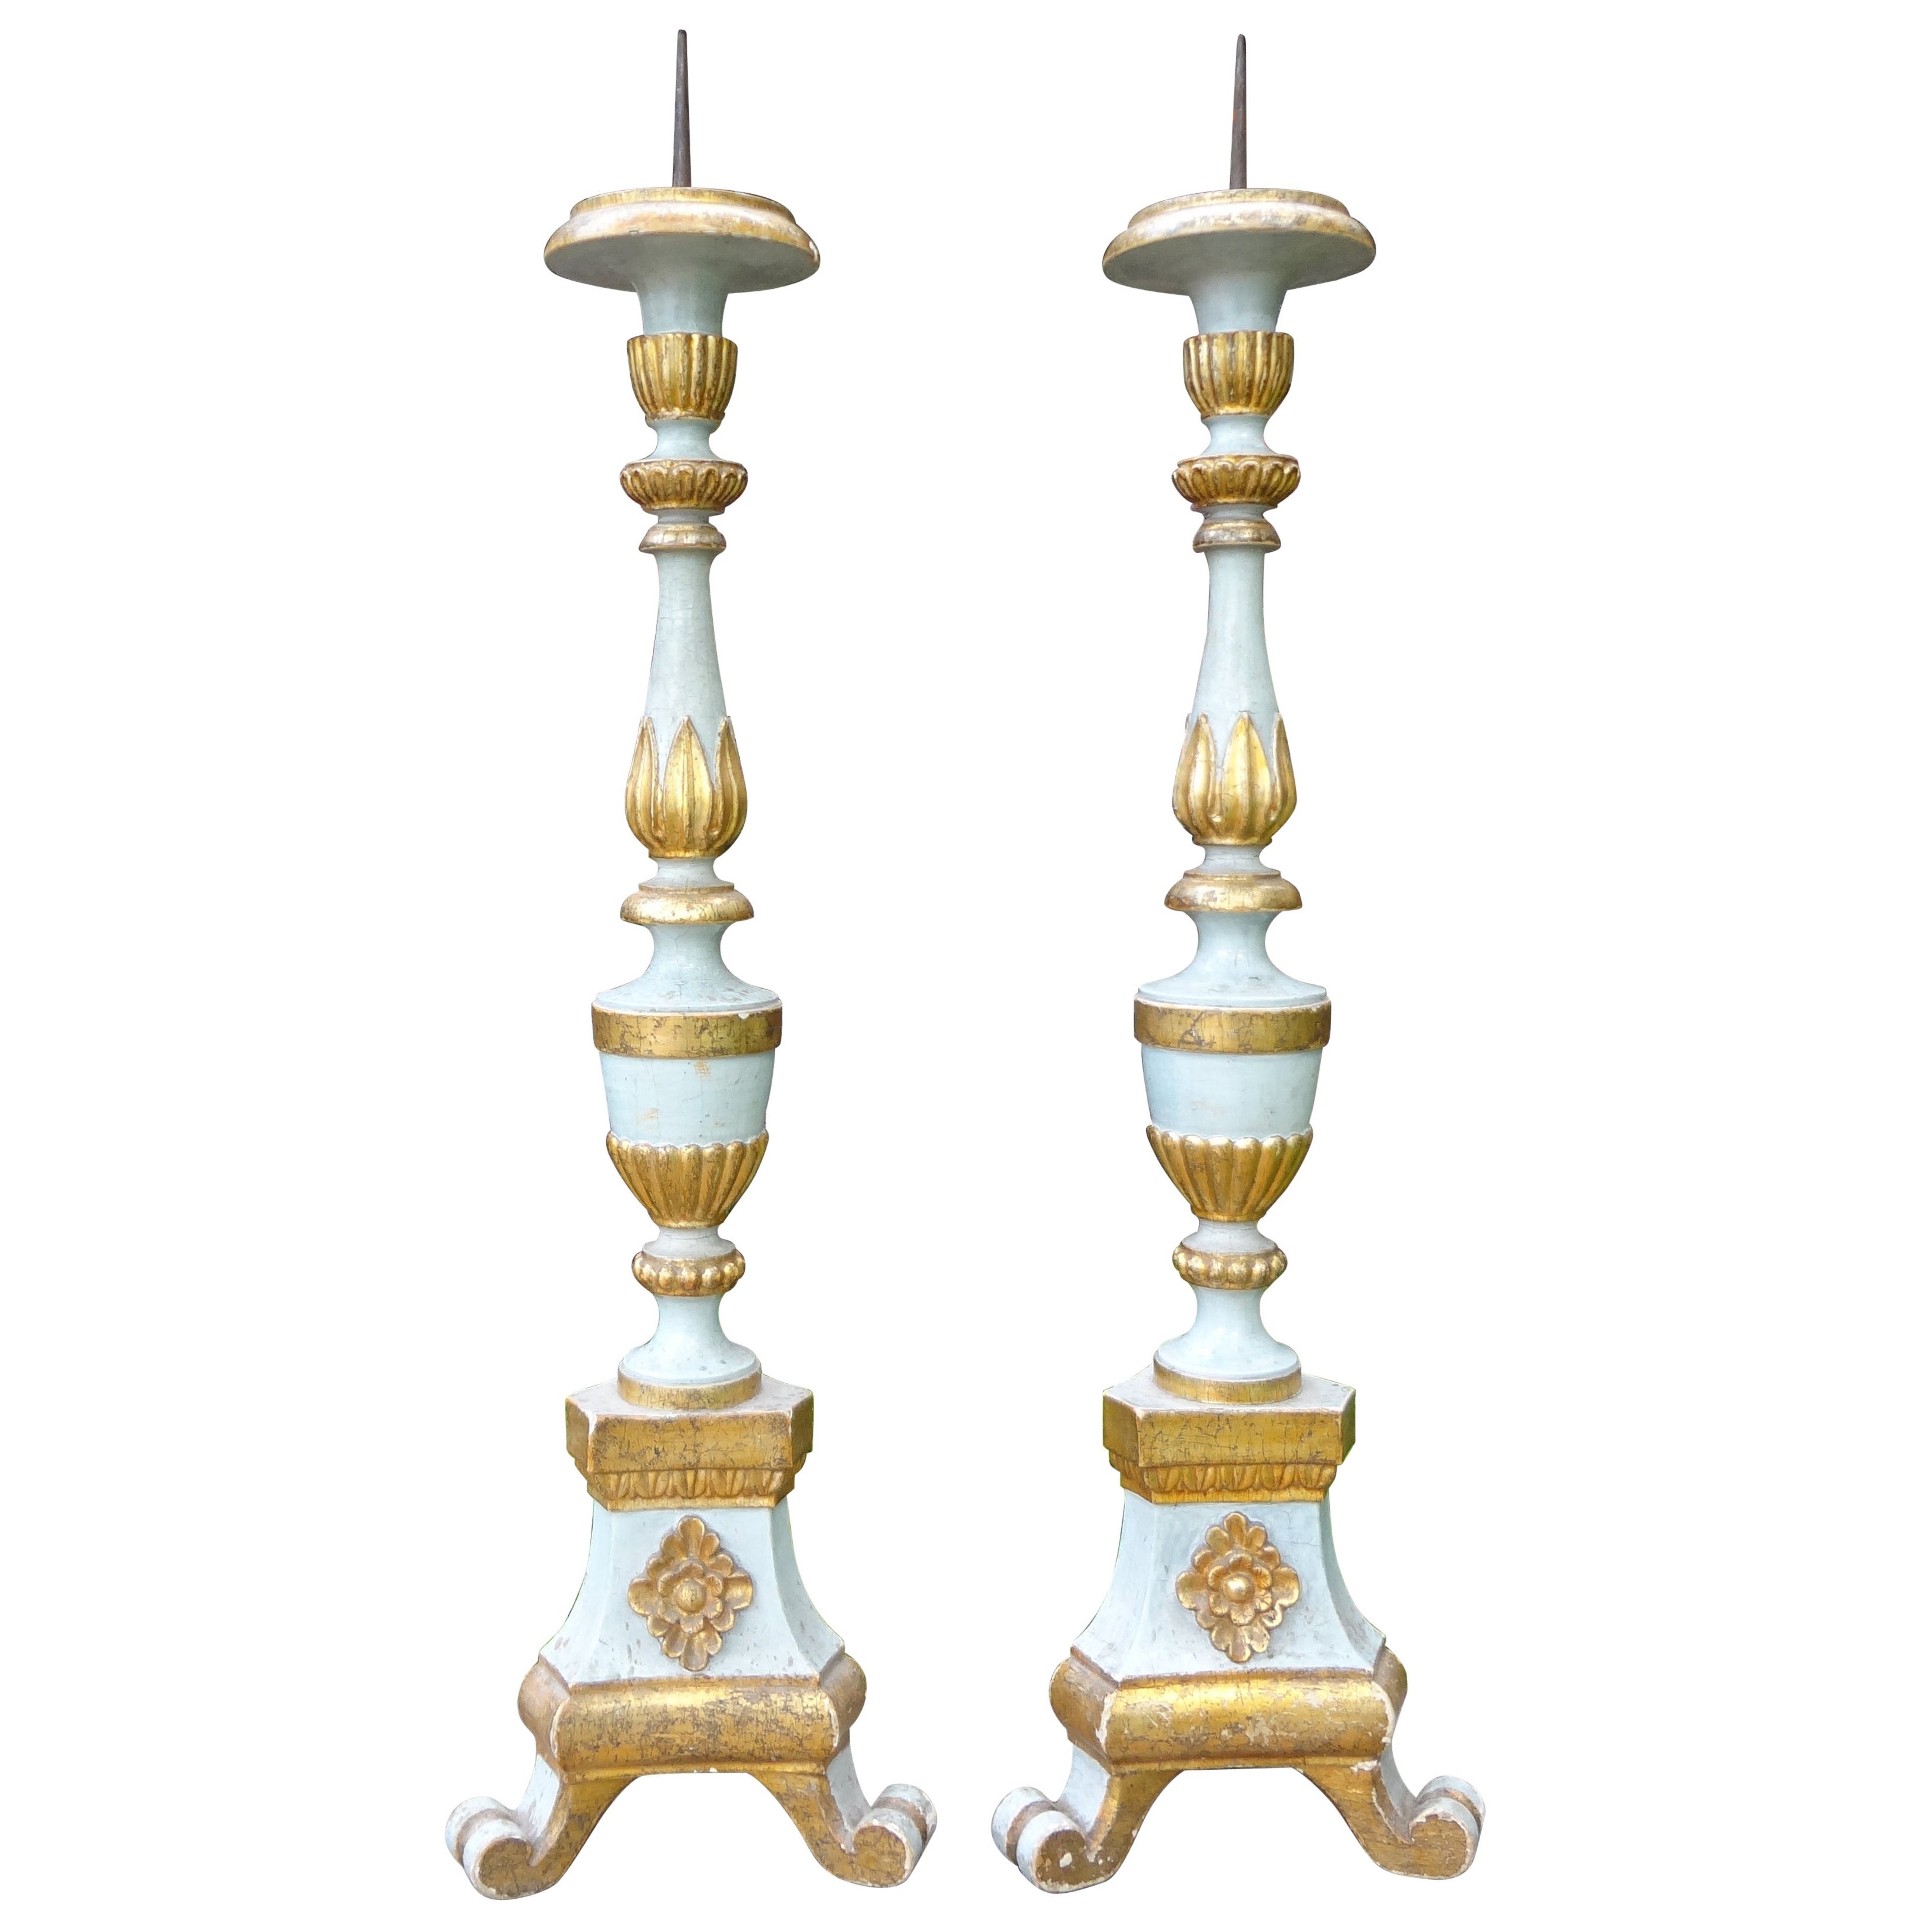 Pair of 19th Century Italian Painted And Gilt Altar Sticks or Prickets